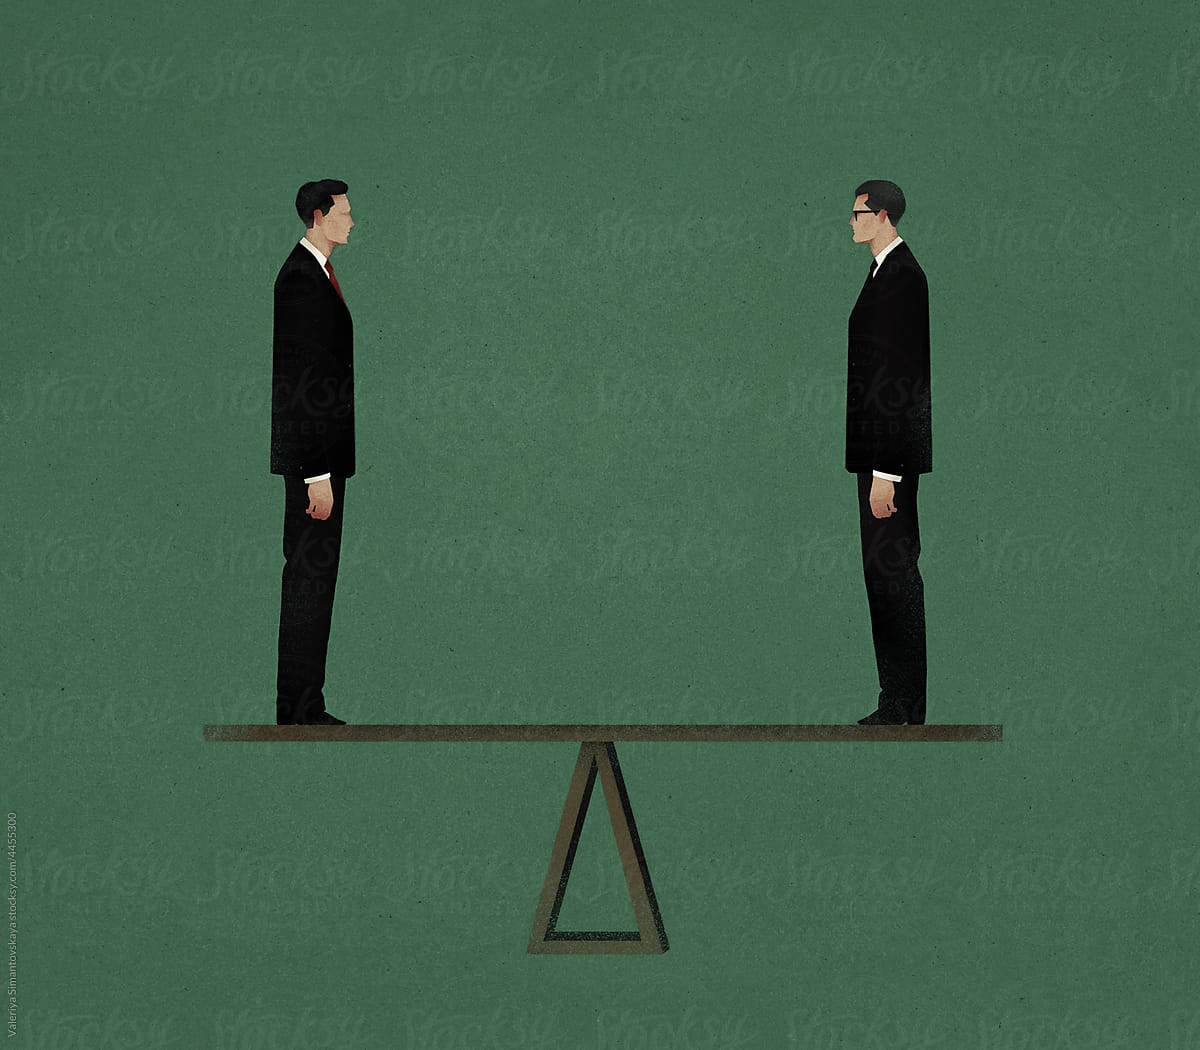 Two businessmen standing on a seesaw illustration